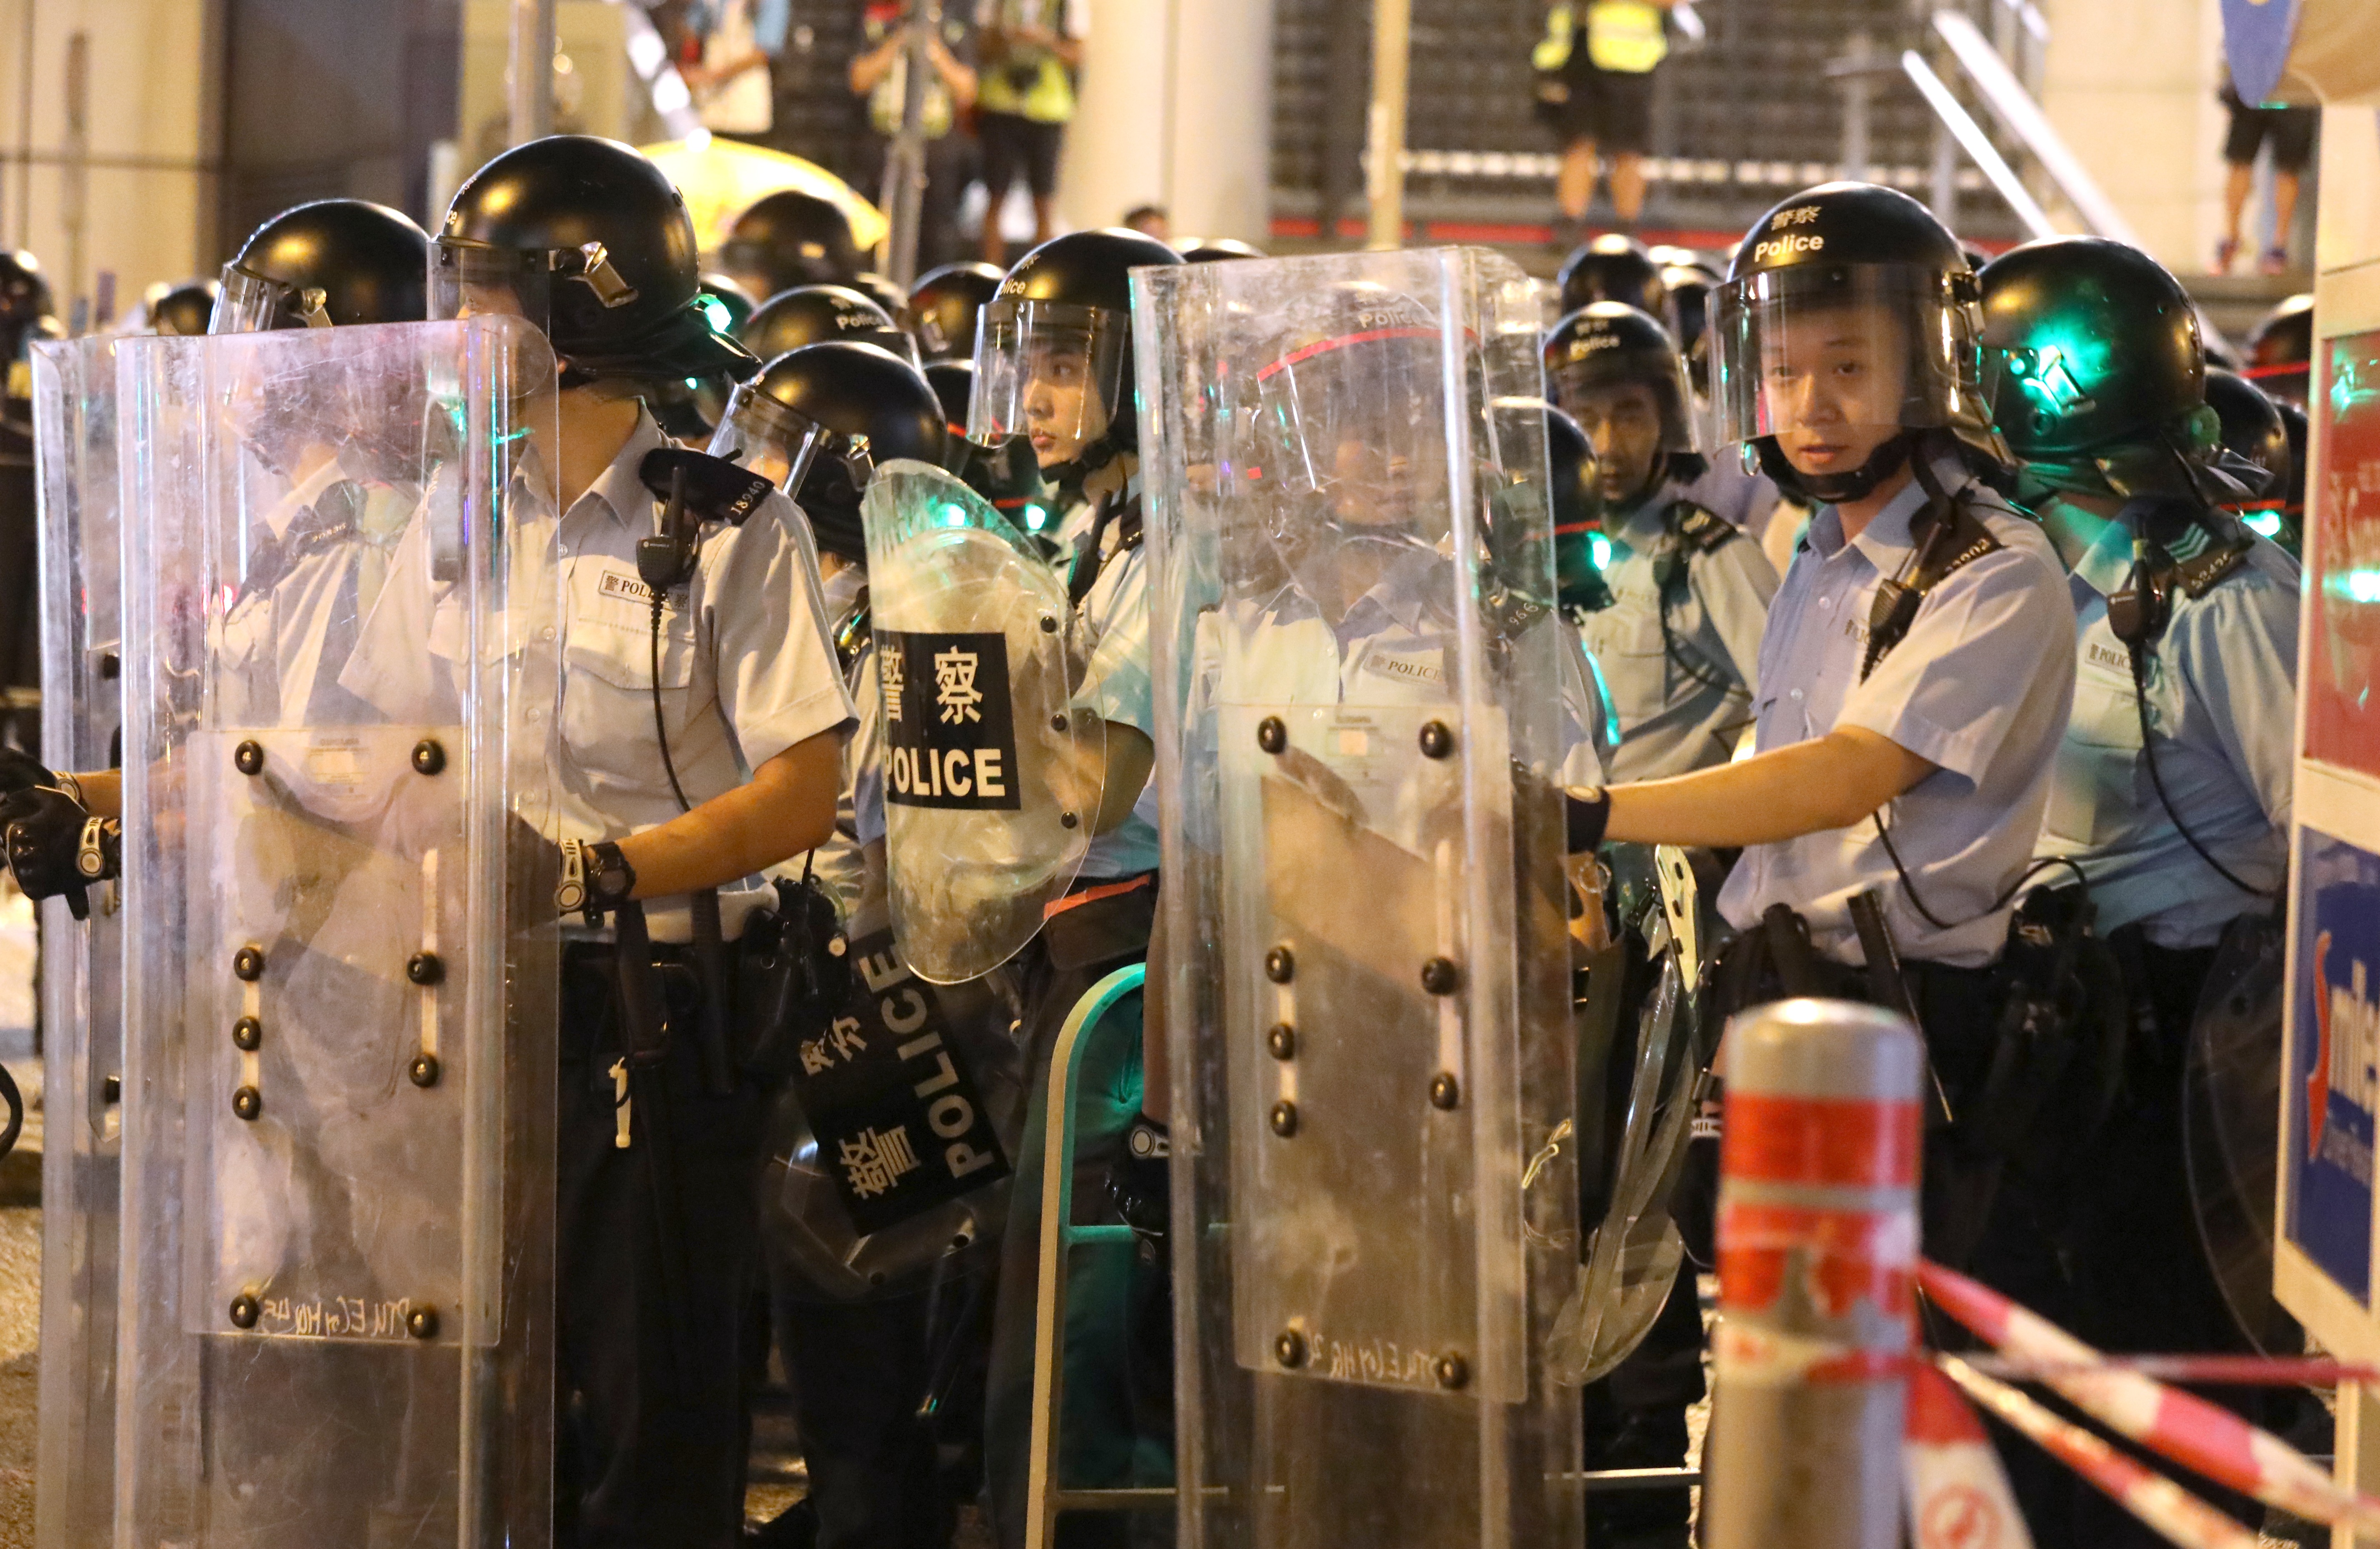 Riot police outside the force’s headquarters in Wan Chai on Wednesday night. Photo: Dickson Lee